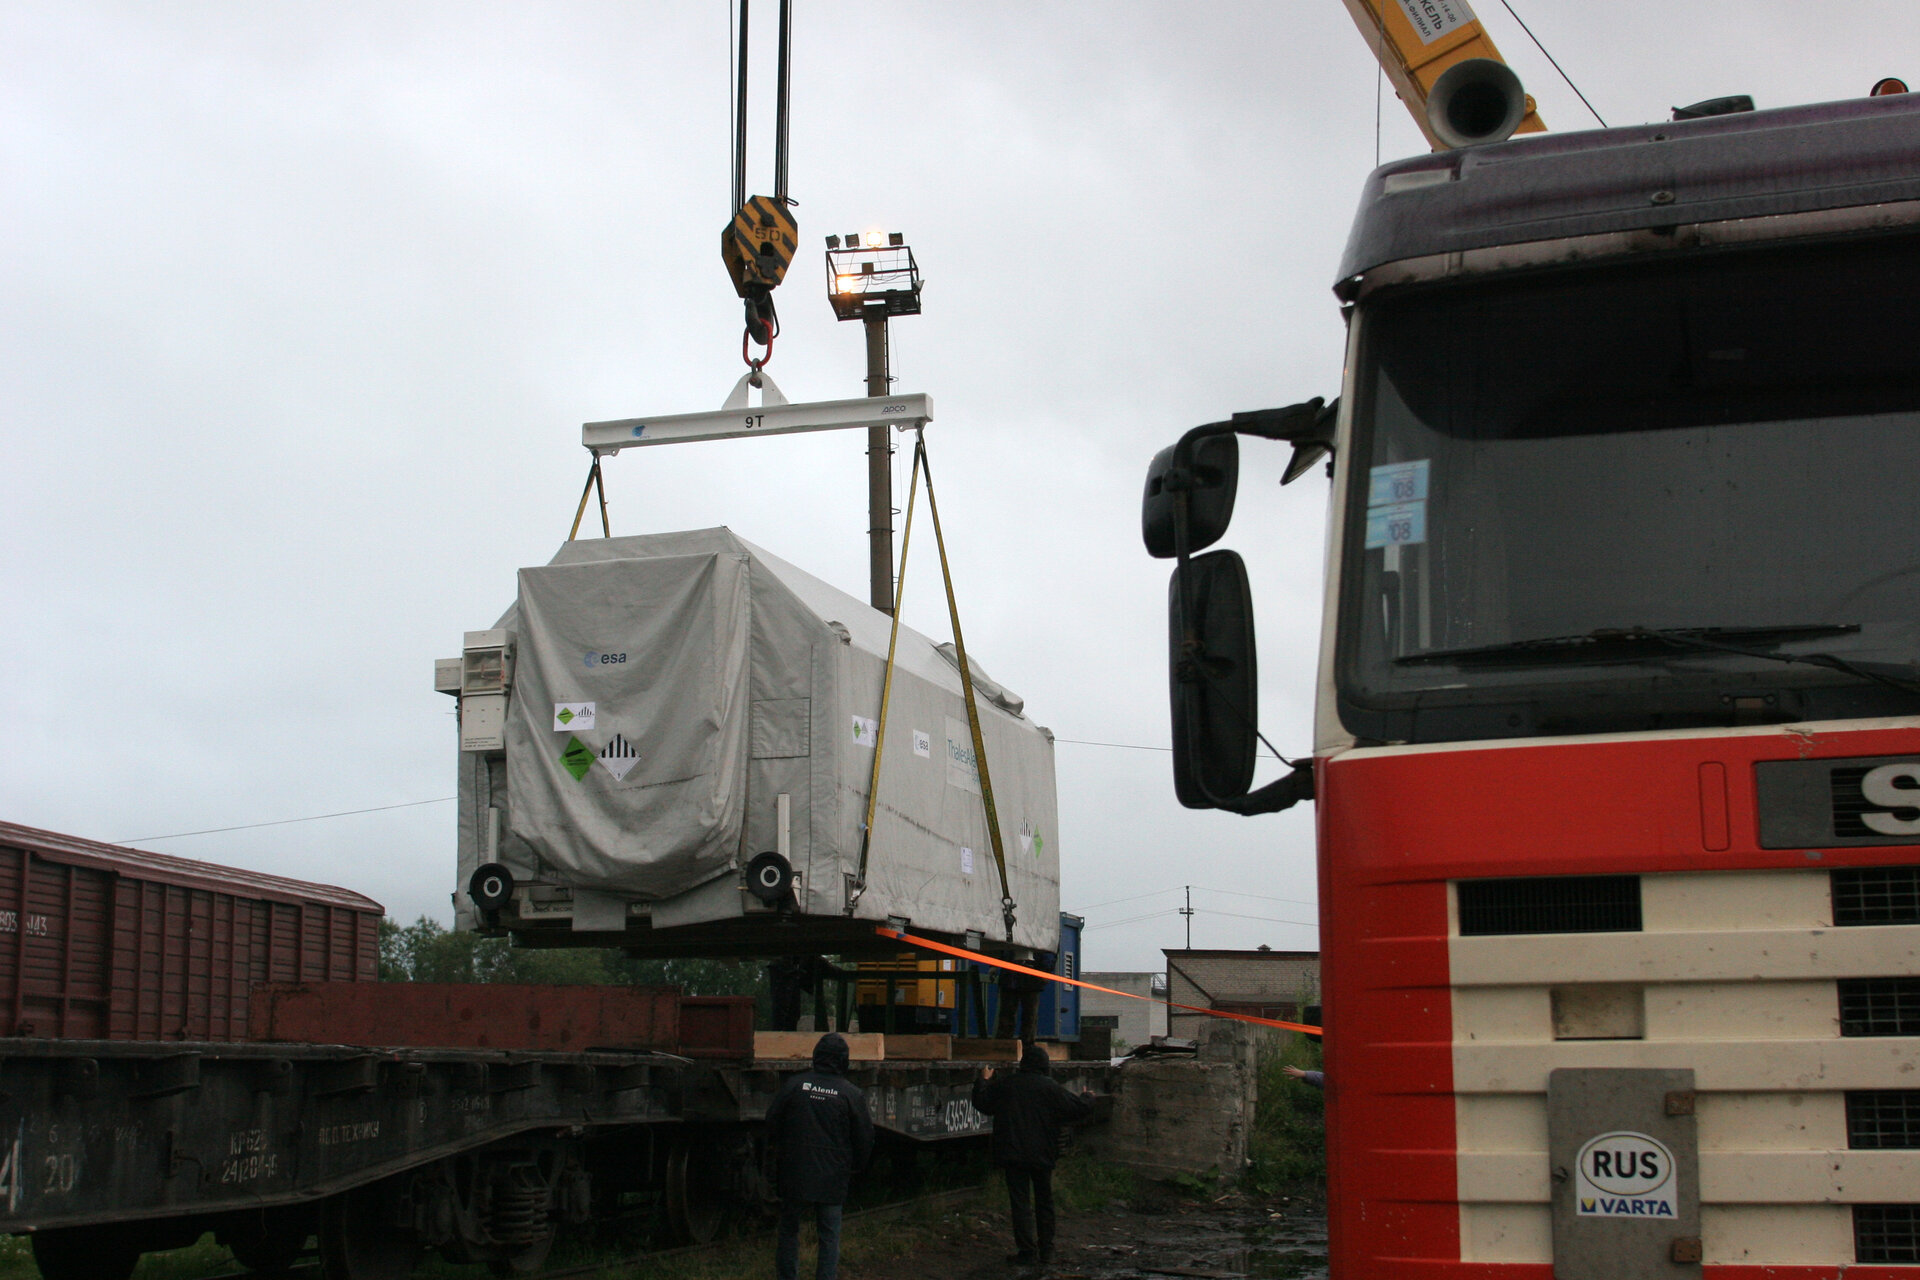 Spacecraft being moved from truck to train